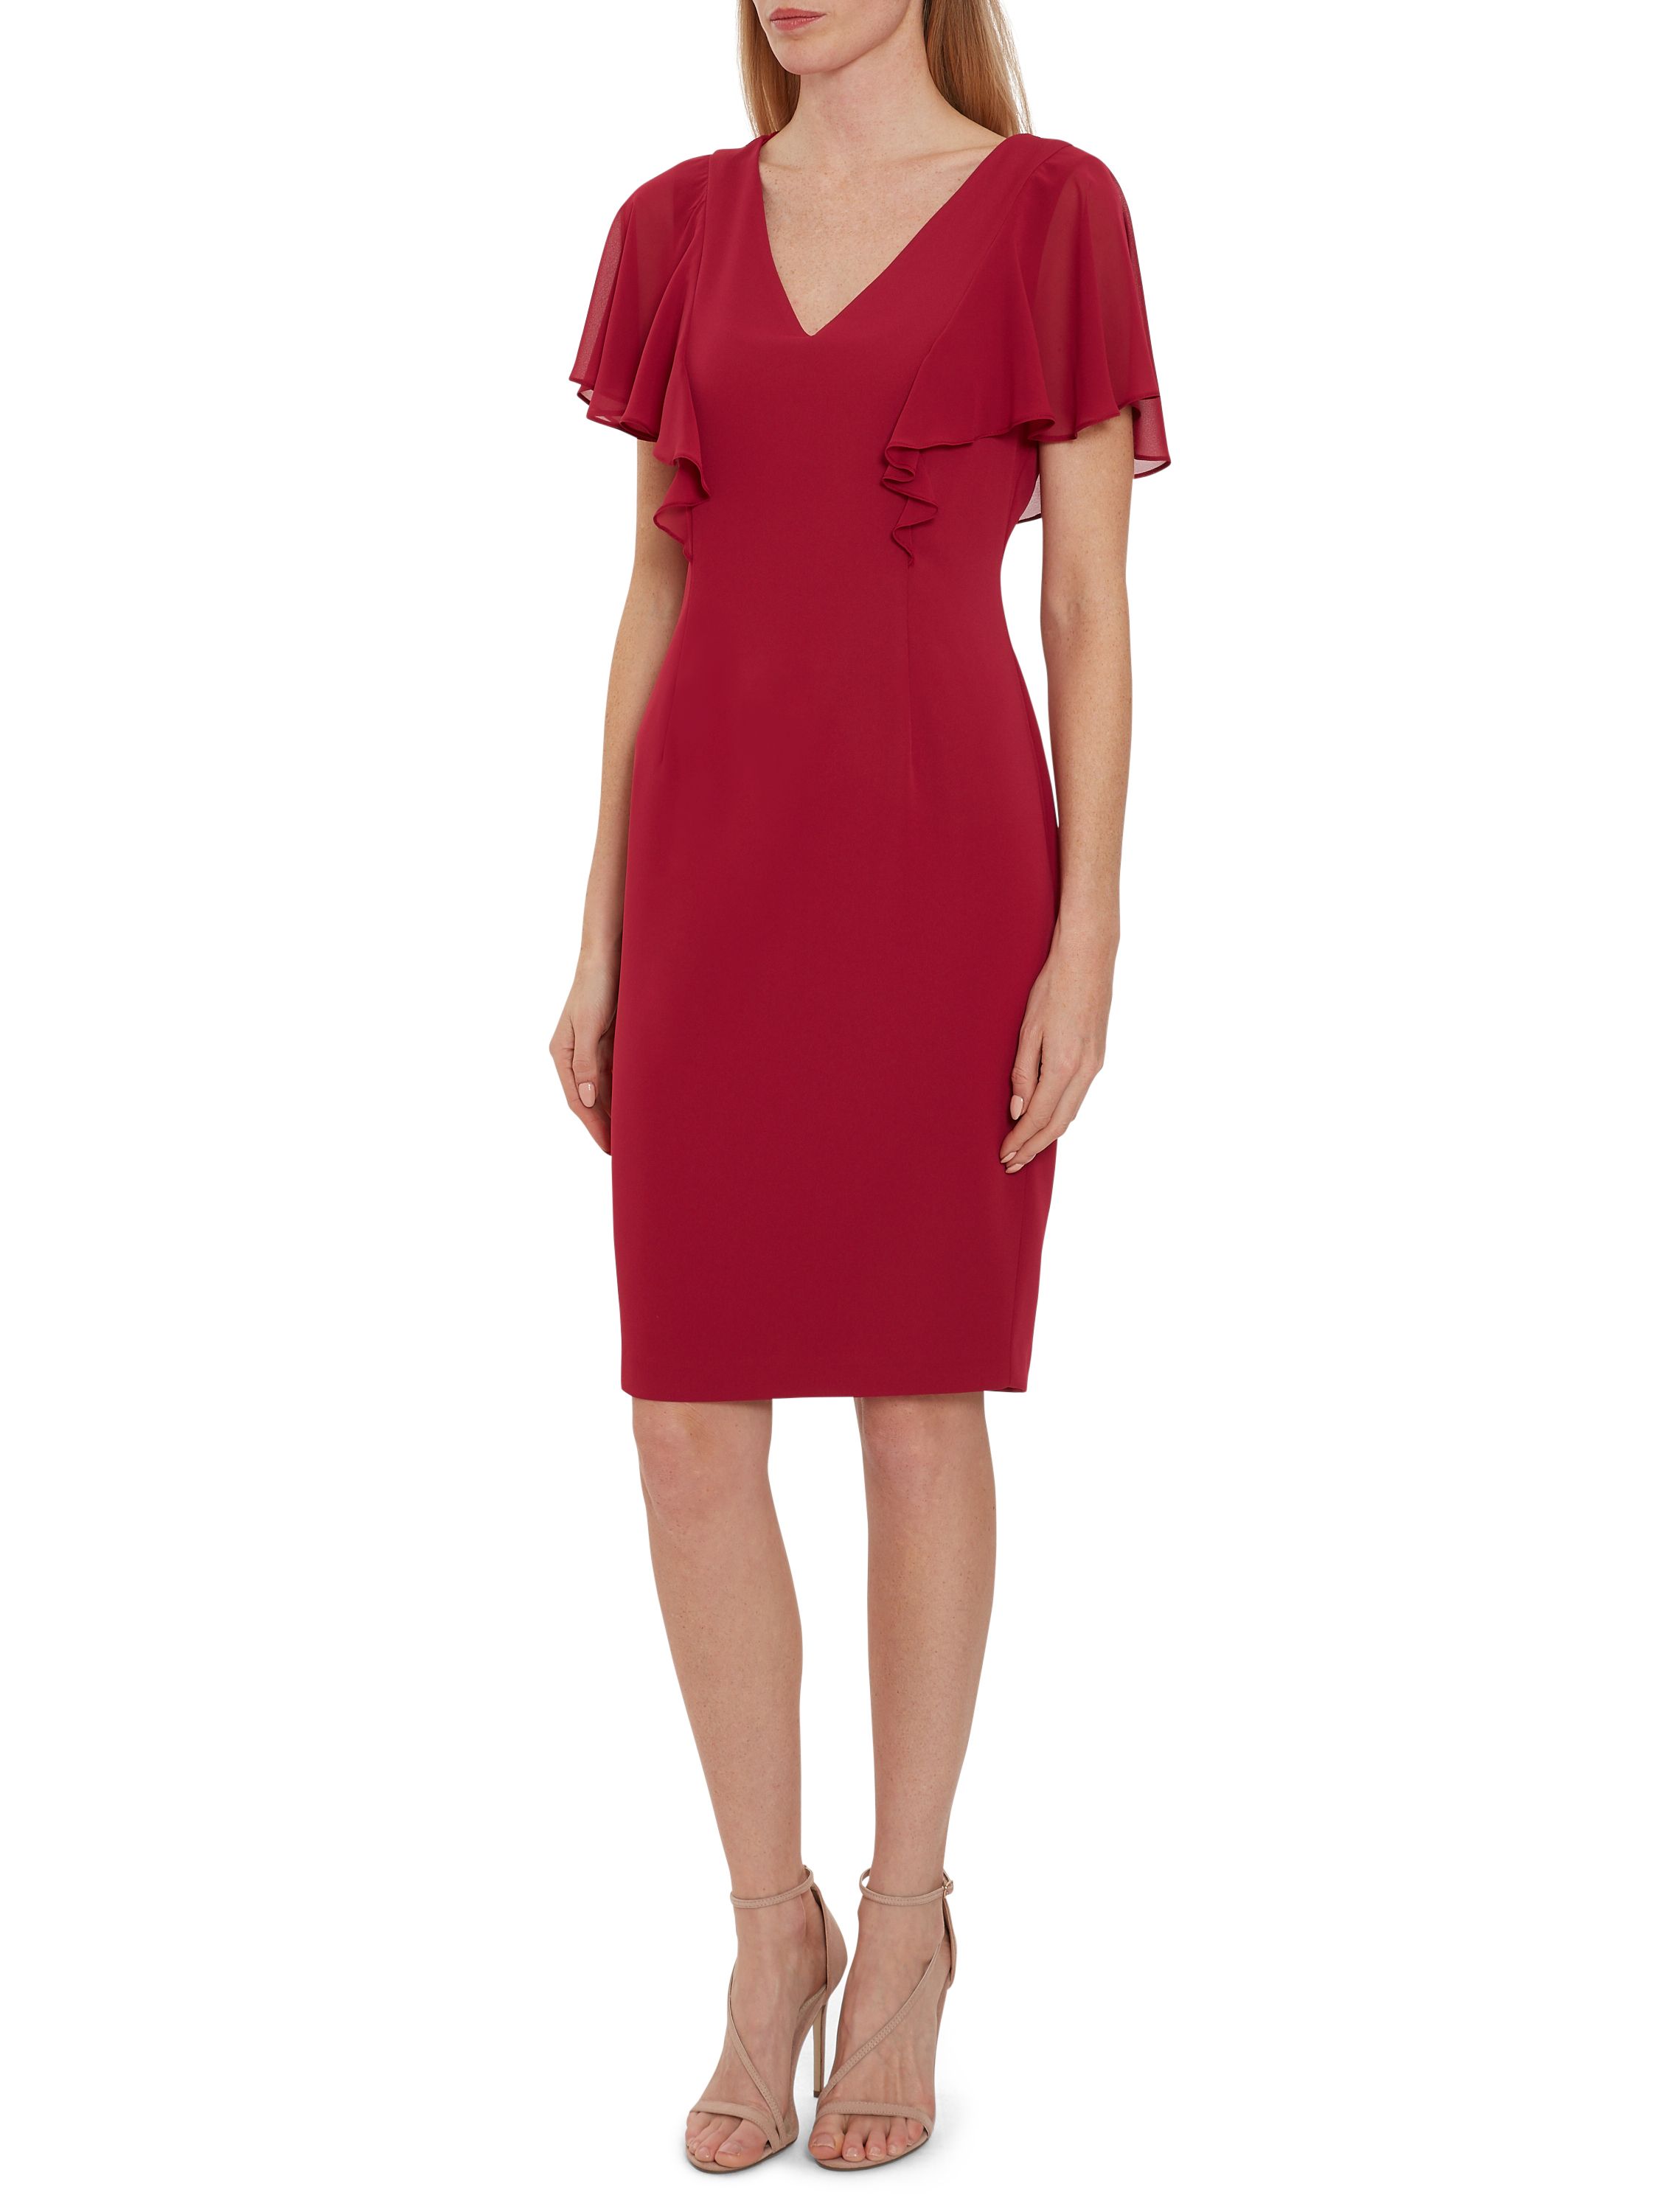 Add this frill dress by Gina Bacconi to your partywear wardrobe this season. This classic and versatile shift dress shape is fashioned from moss crepe. The dress is overlaid with elegant chiffon sleeves.The dress is lined and fastens with a zip and a button at the back of the neck.